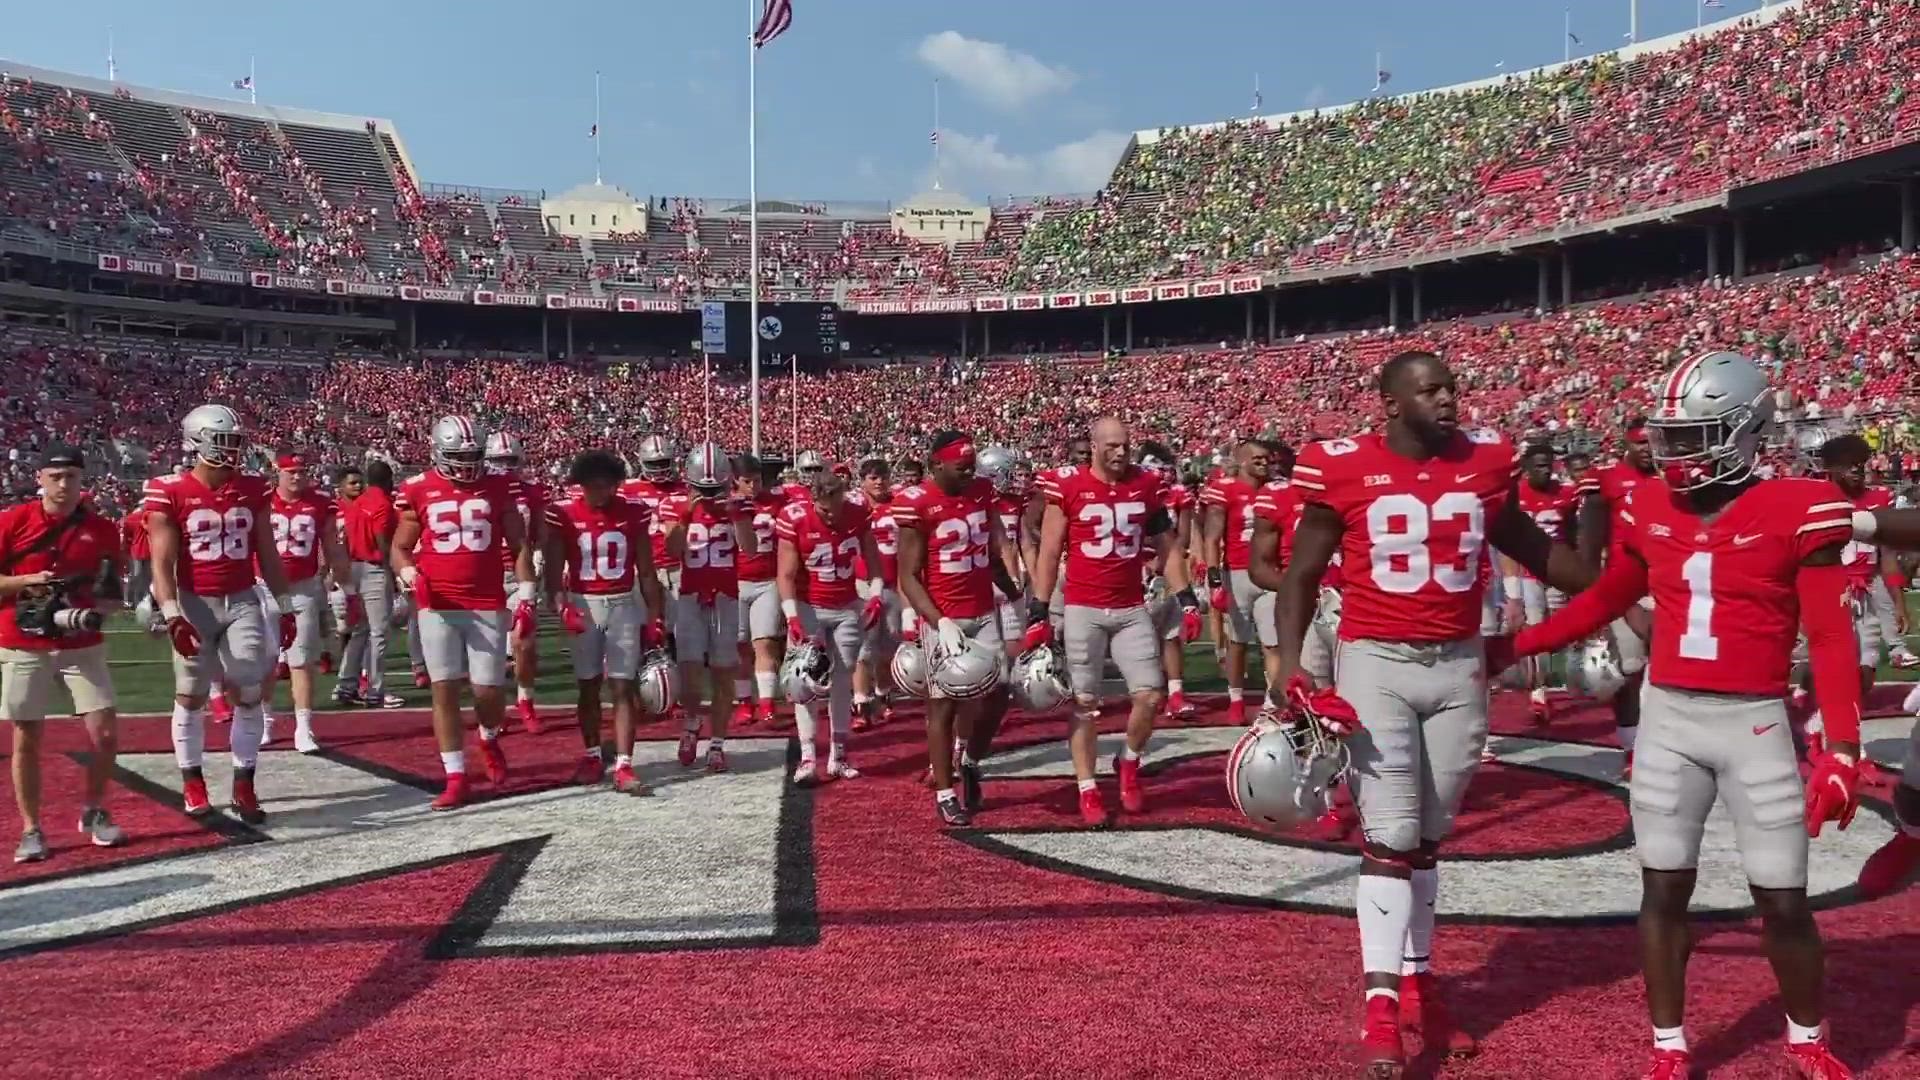 Sticking with tradition, the Buckeyes sang 'Carmen Ohio' in the south end of The Horseshoe after the loss to Oregon.